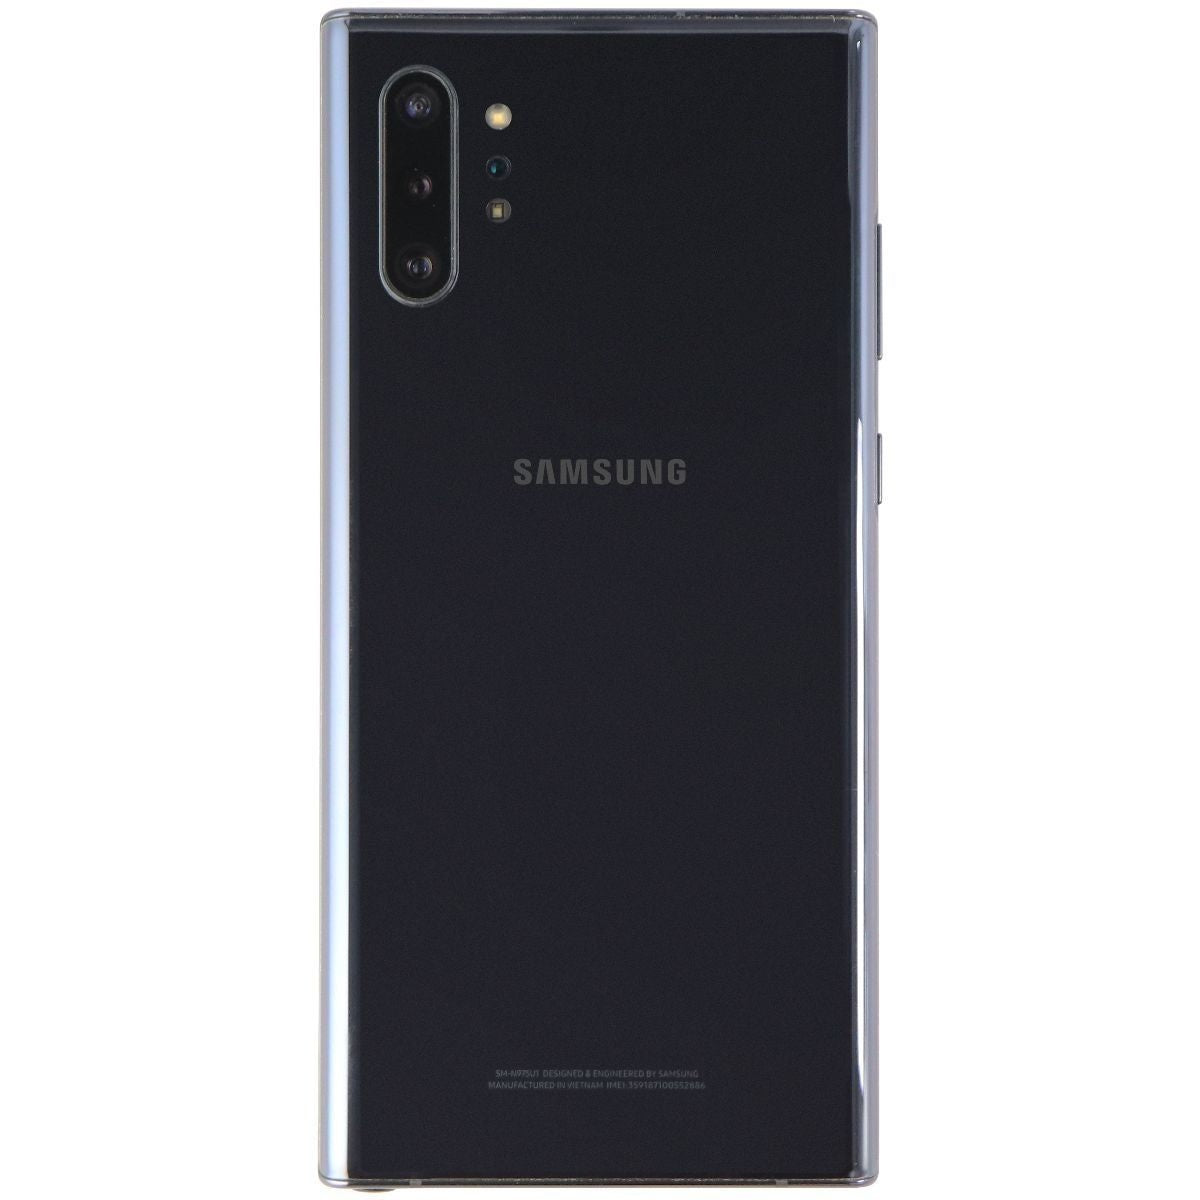 Samsung Galaxy Note10+ (6.8-inch) SM-N975U (AT&T Only) - 256GB / Aura Black Cell Phones & Smartphones Samsung    - Simple Cell Bulk Wholesale Pricing - USA Seller